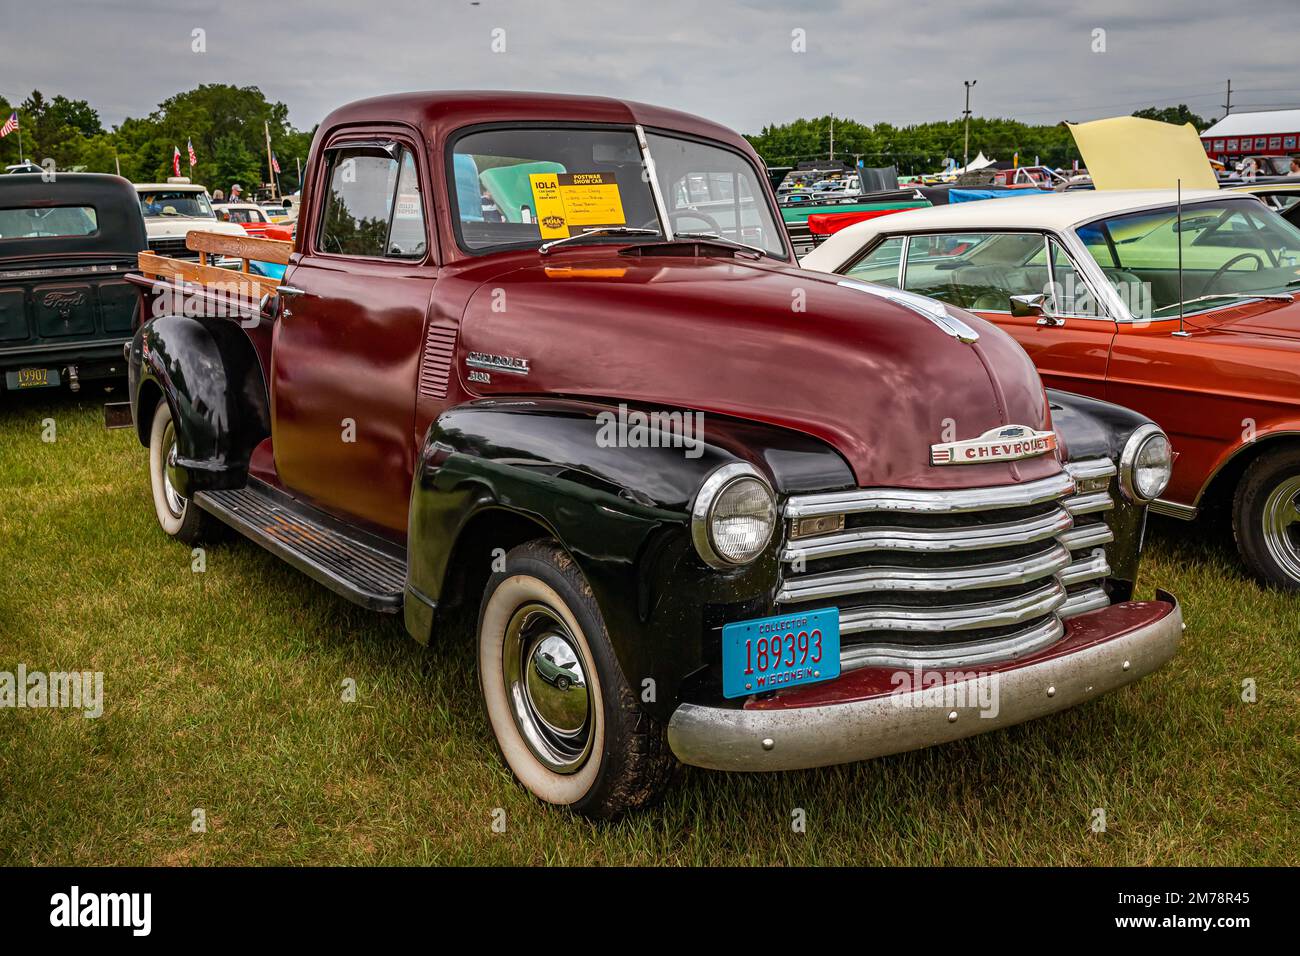 Iola, WI - July 07, 2022: High perspective front corner view of a 1951 Chevrolet 3100 Pickup Truck at a local car show. Stock Photo